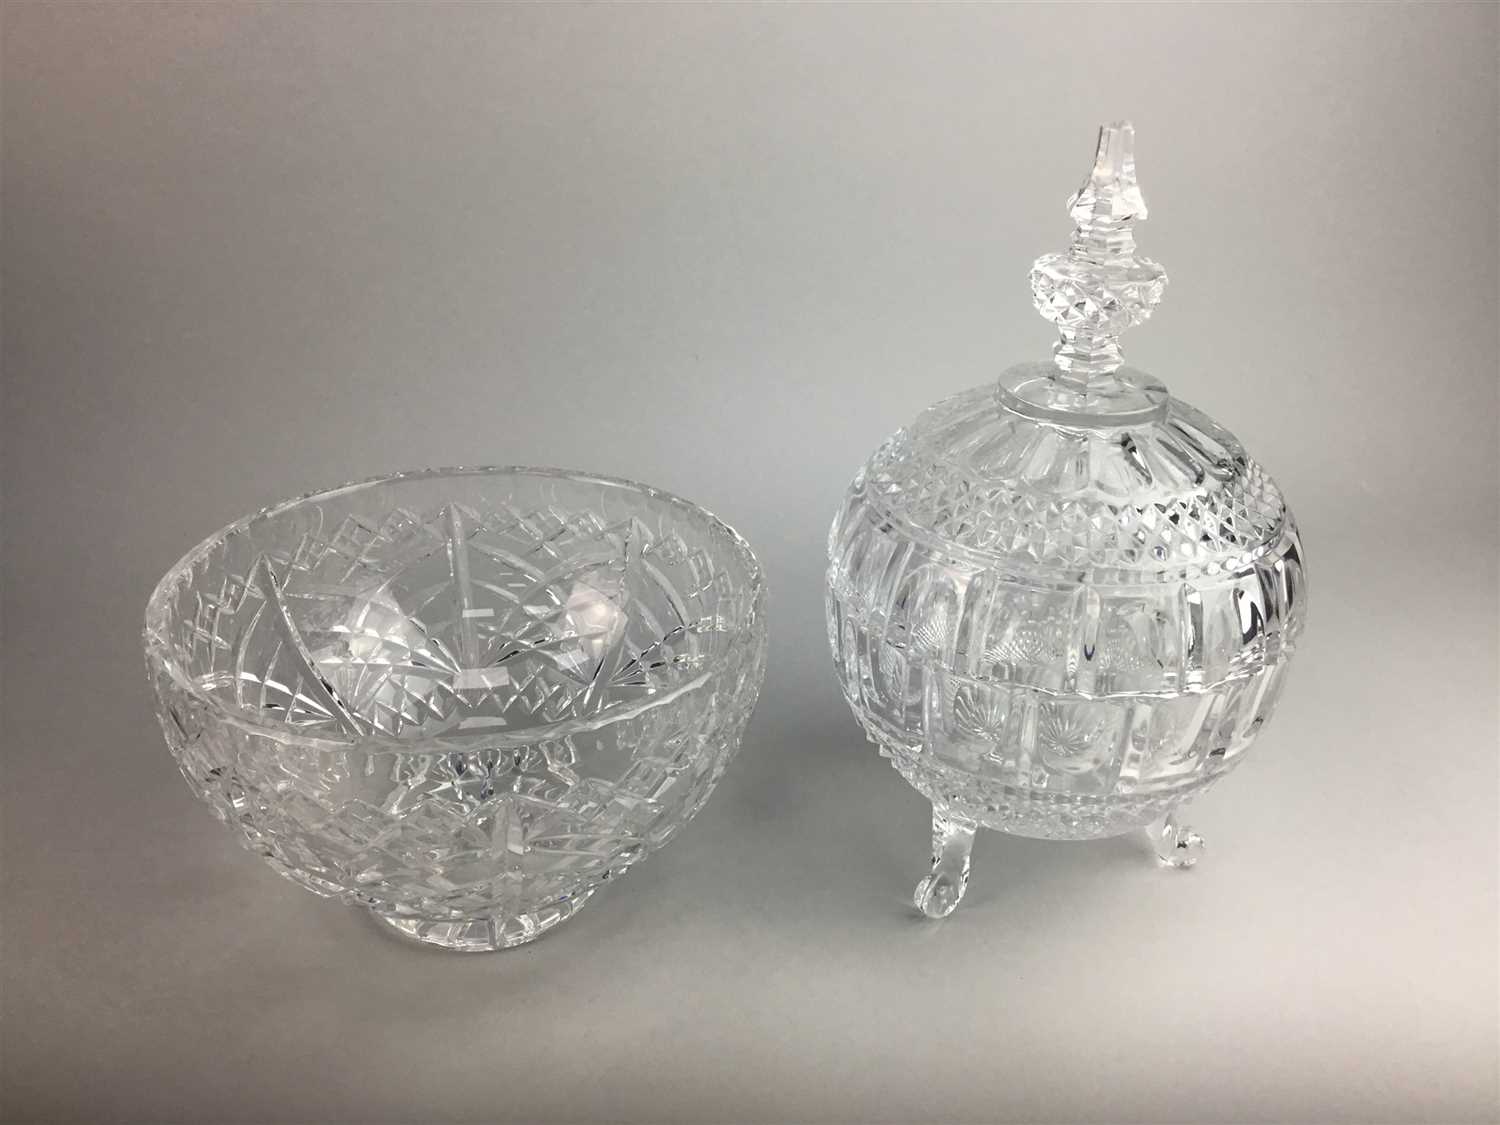 Lot 212 - A LOT OF CRYSTAL VASES, GLASSES AND DISHES